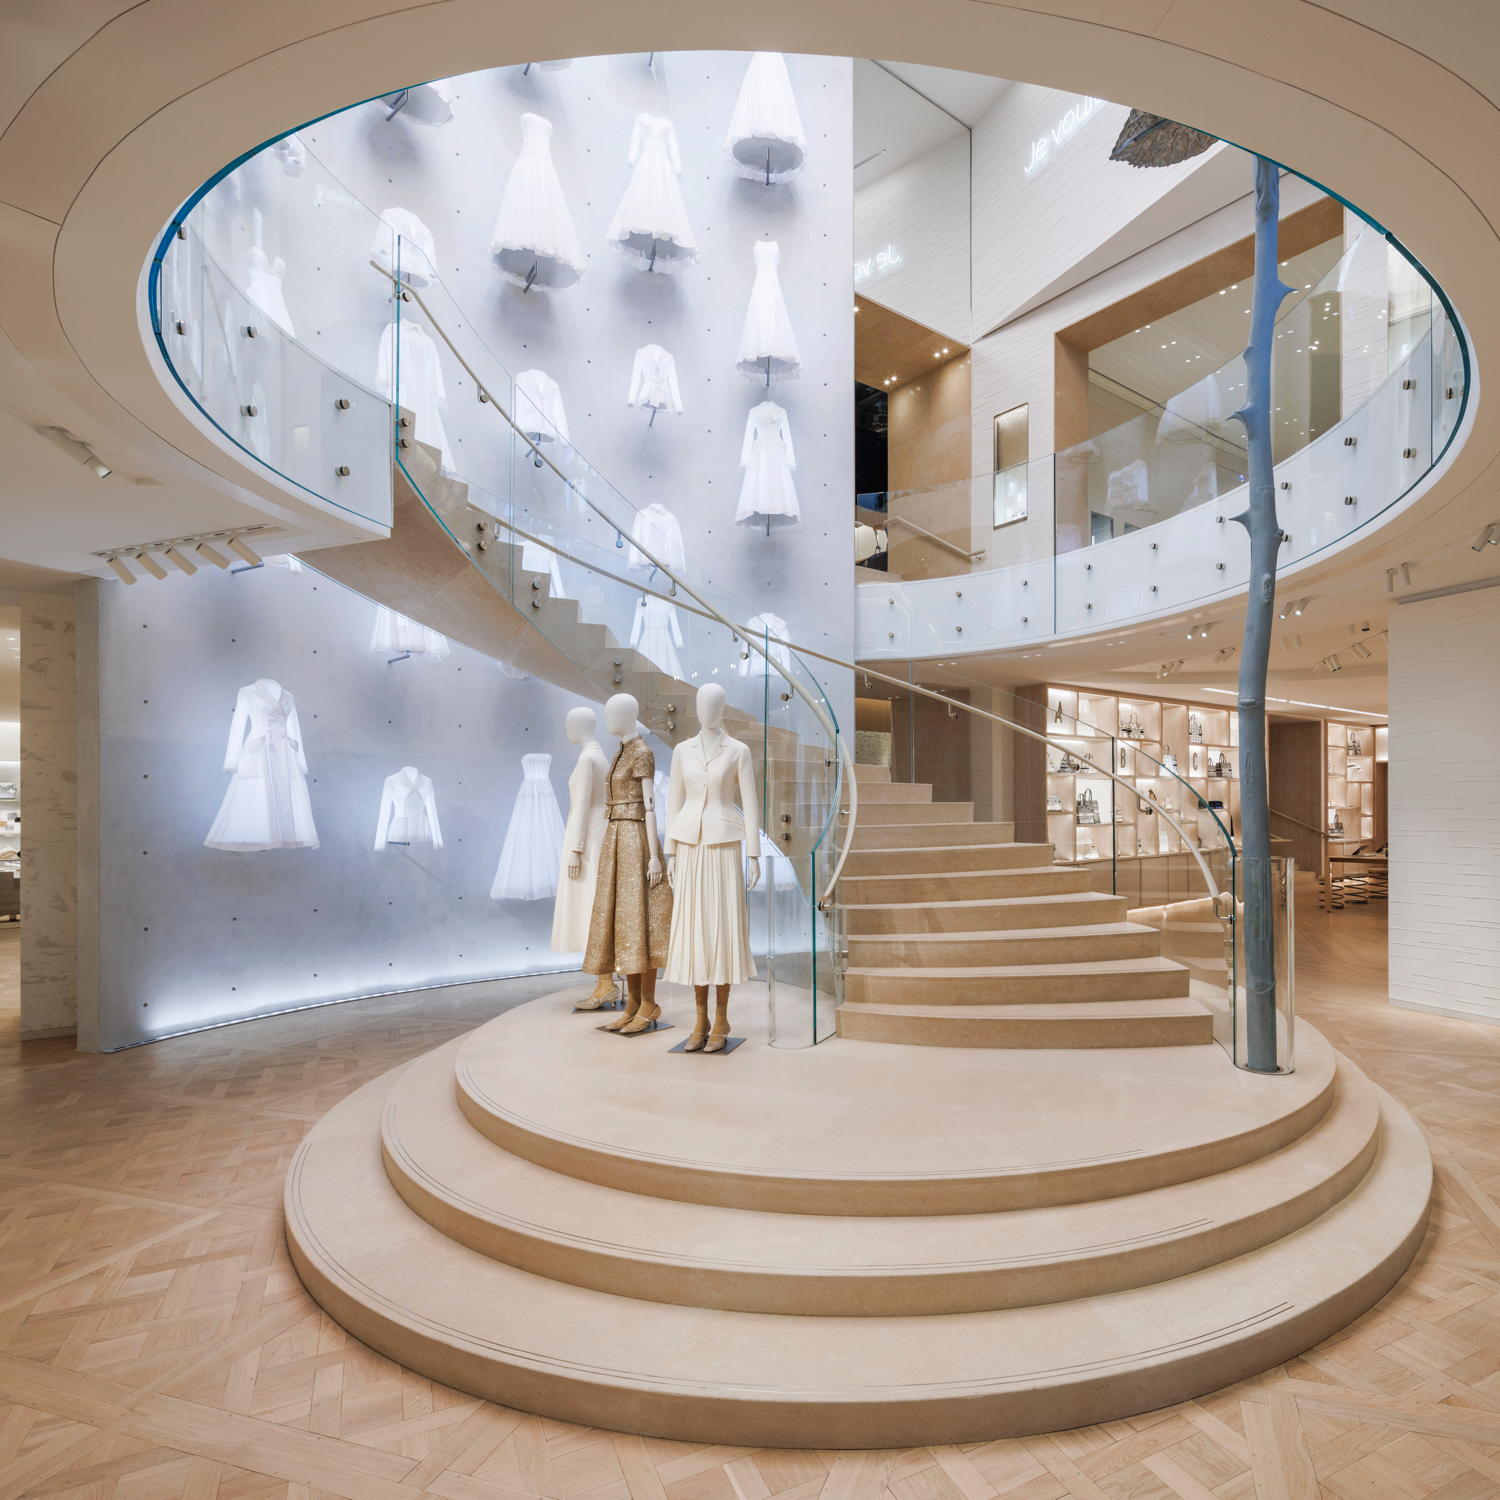 Peter Marino Reinvents the Dior Flagship in Paris